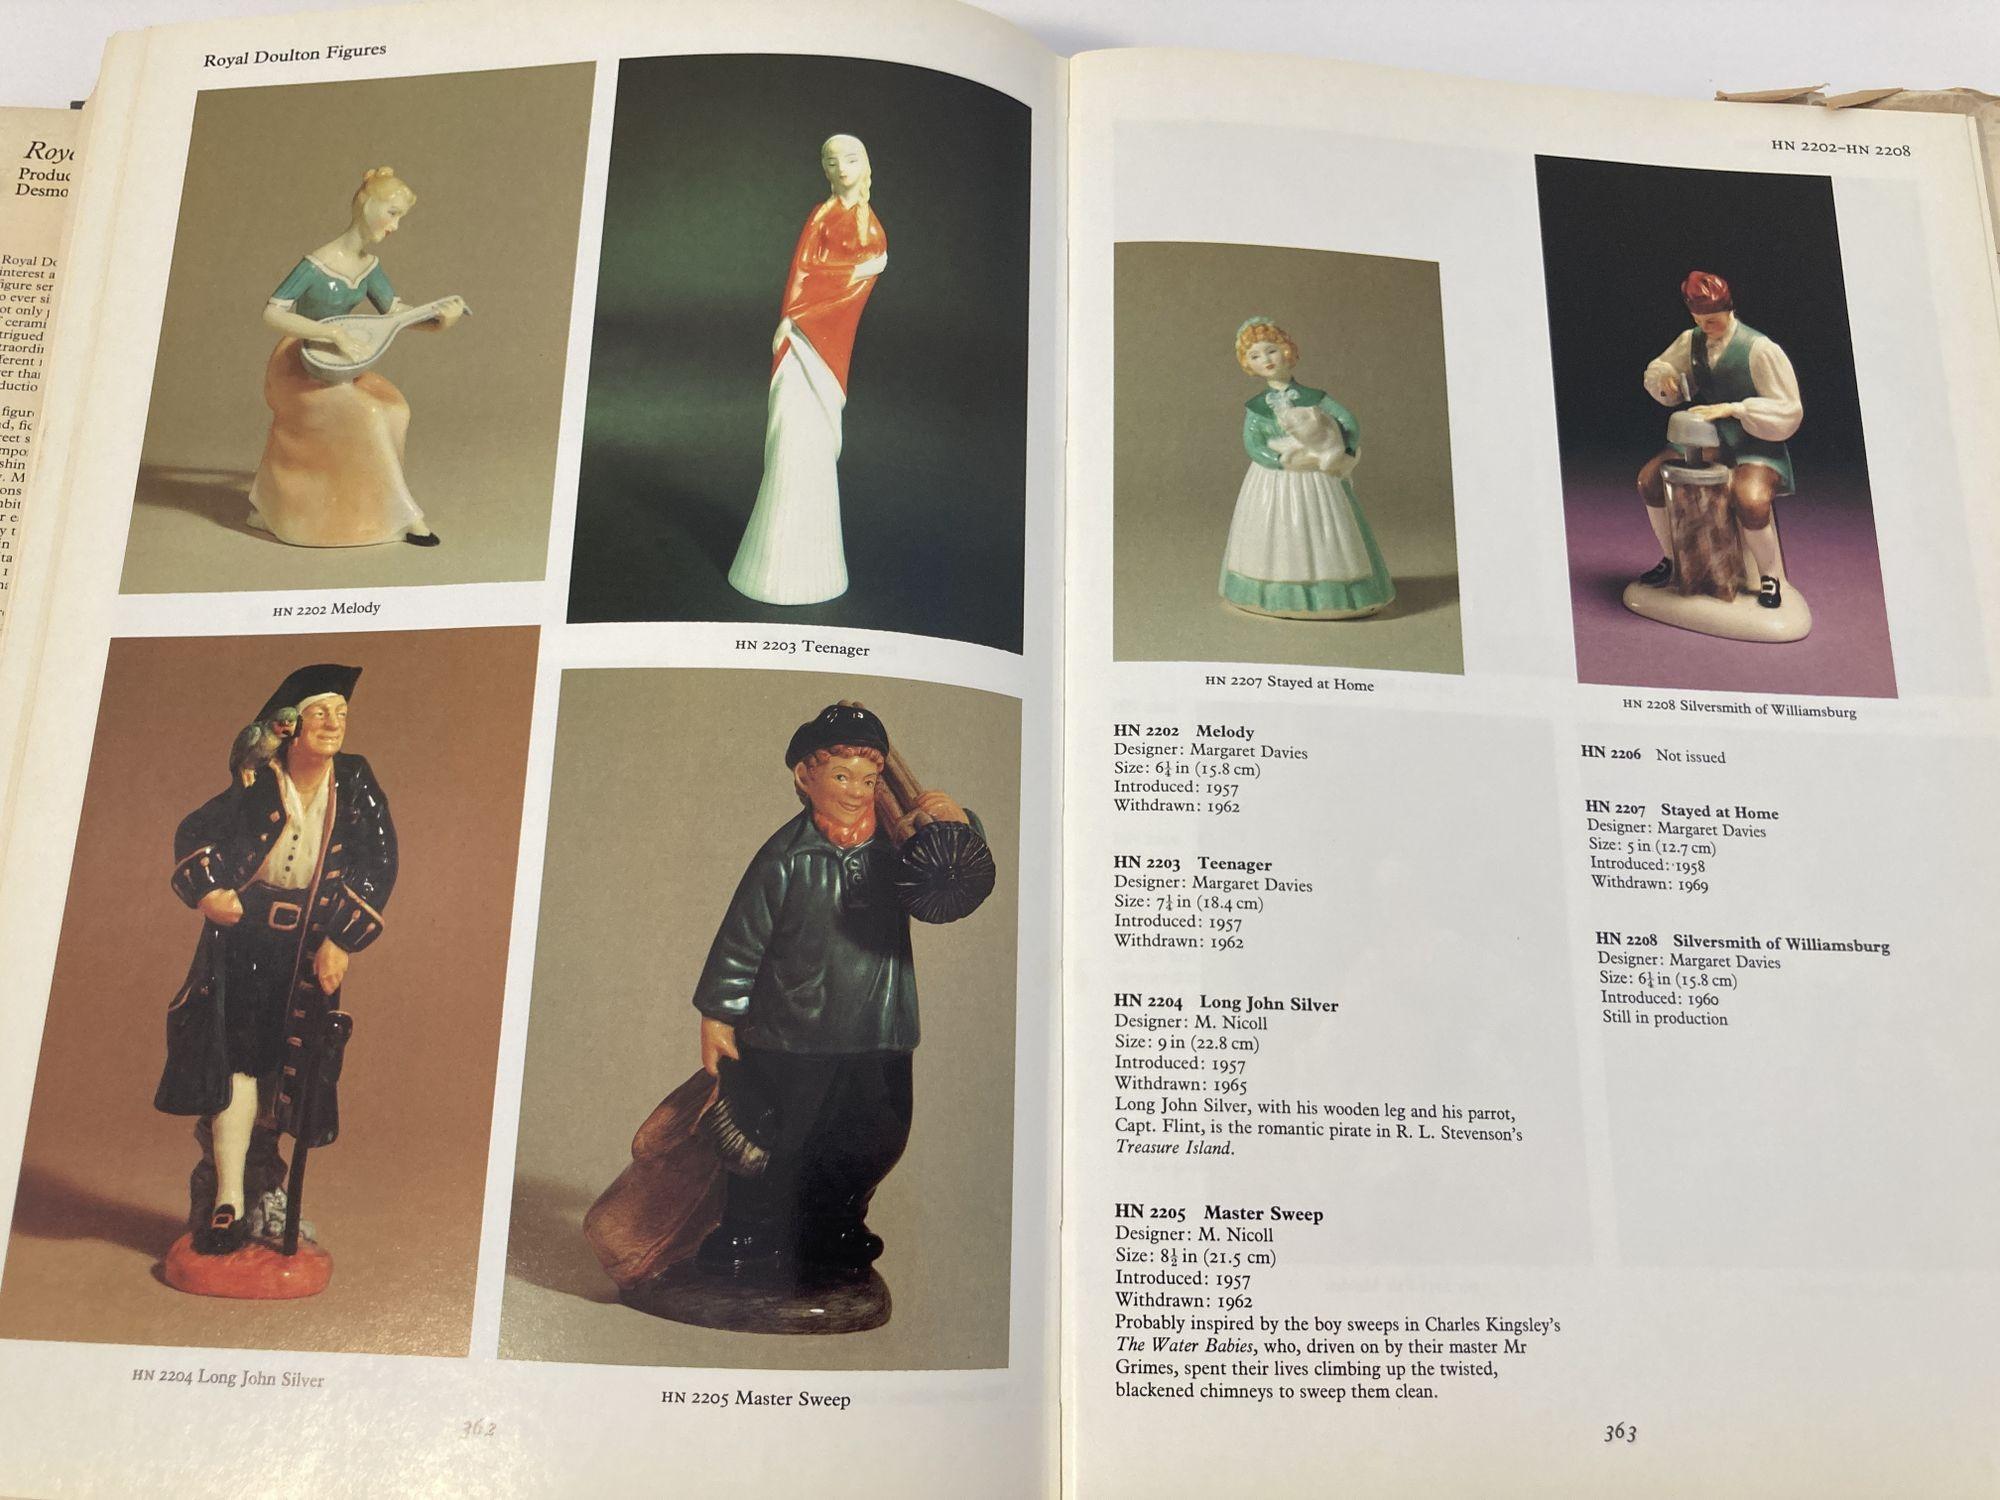 Royal Doulton Figures 1st Ed. Hardcover Book 1979 For Sale 7